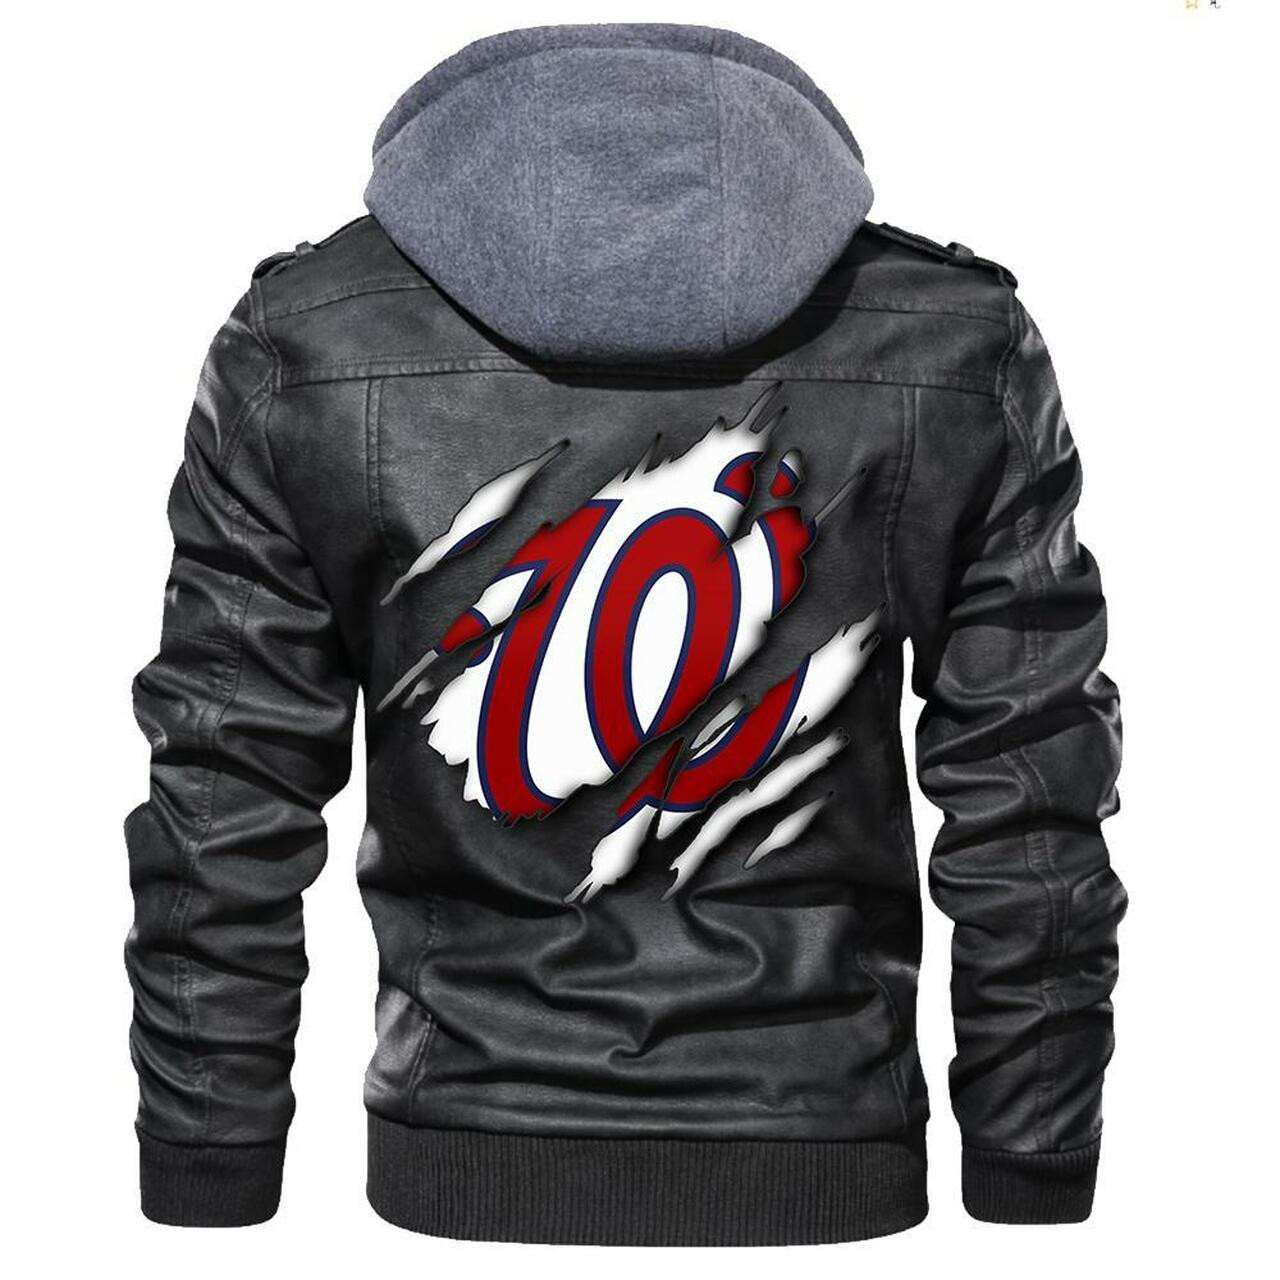 Top 200+ leather jacket so cool for your man 59